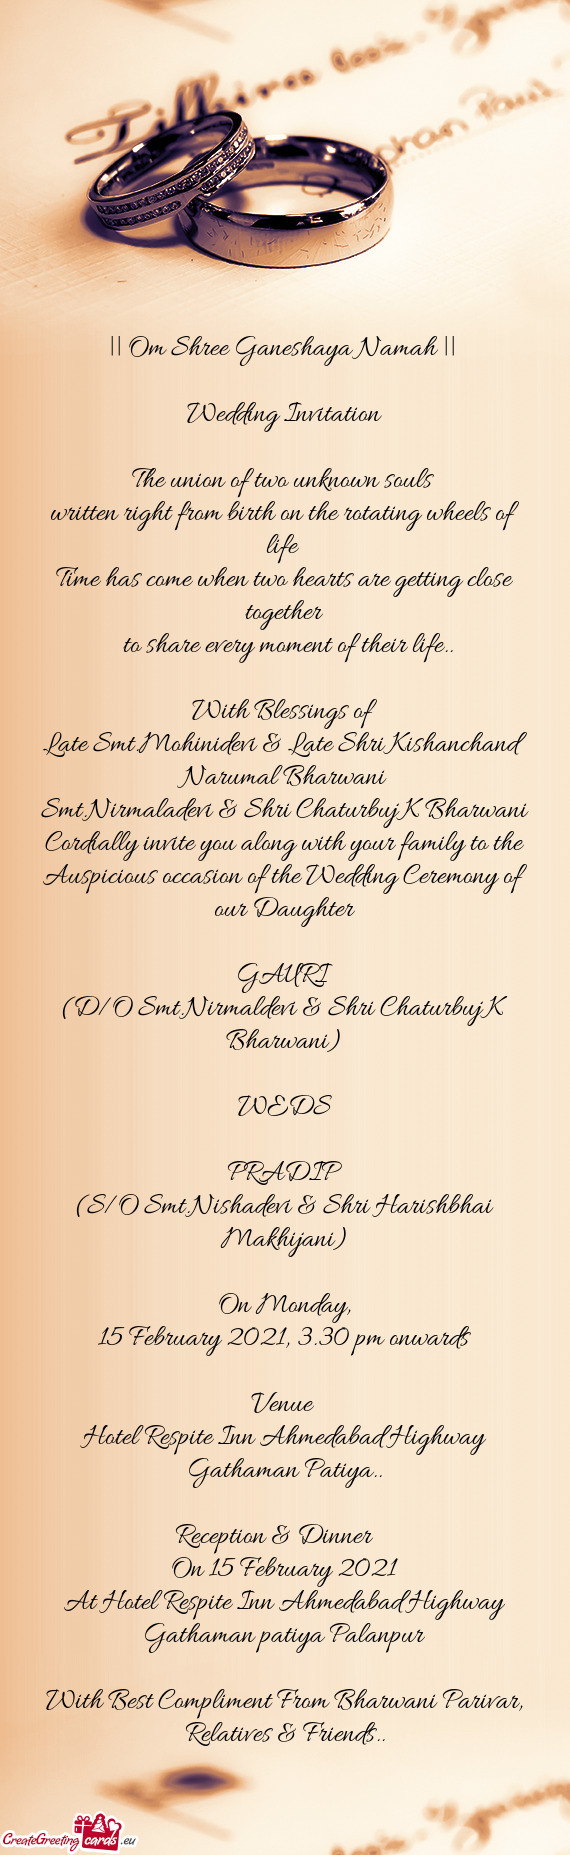 Cordially invite you along with your family to the Auspicious occasion of the Wedding Ceremony of ou